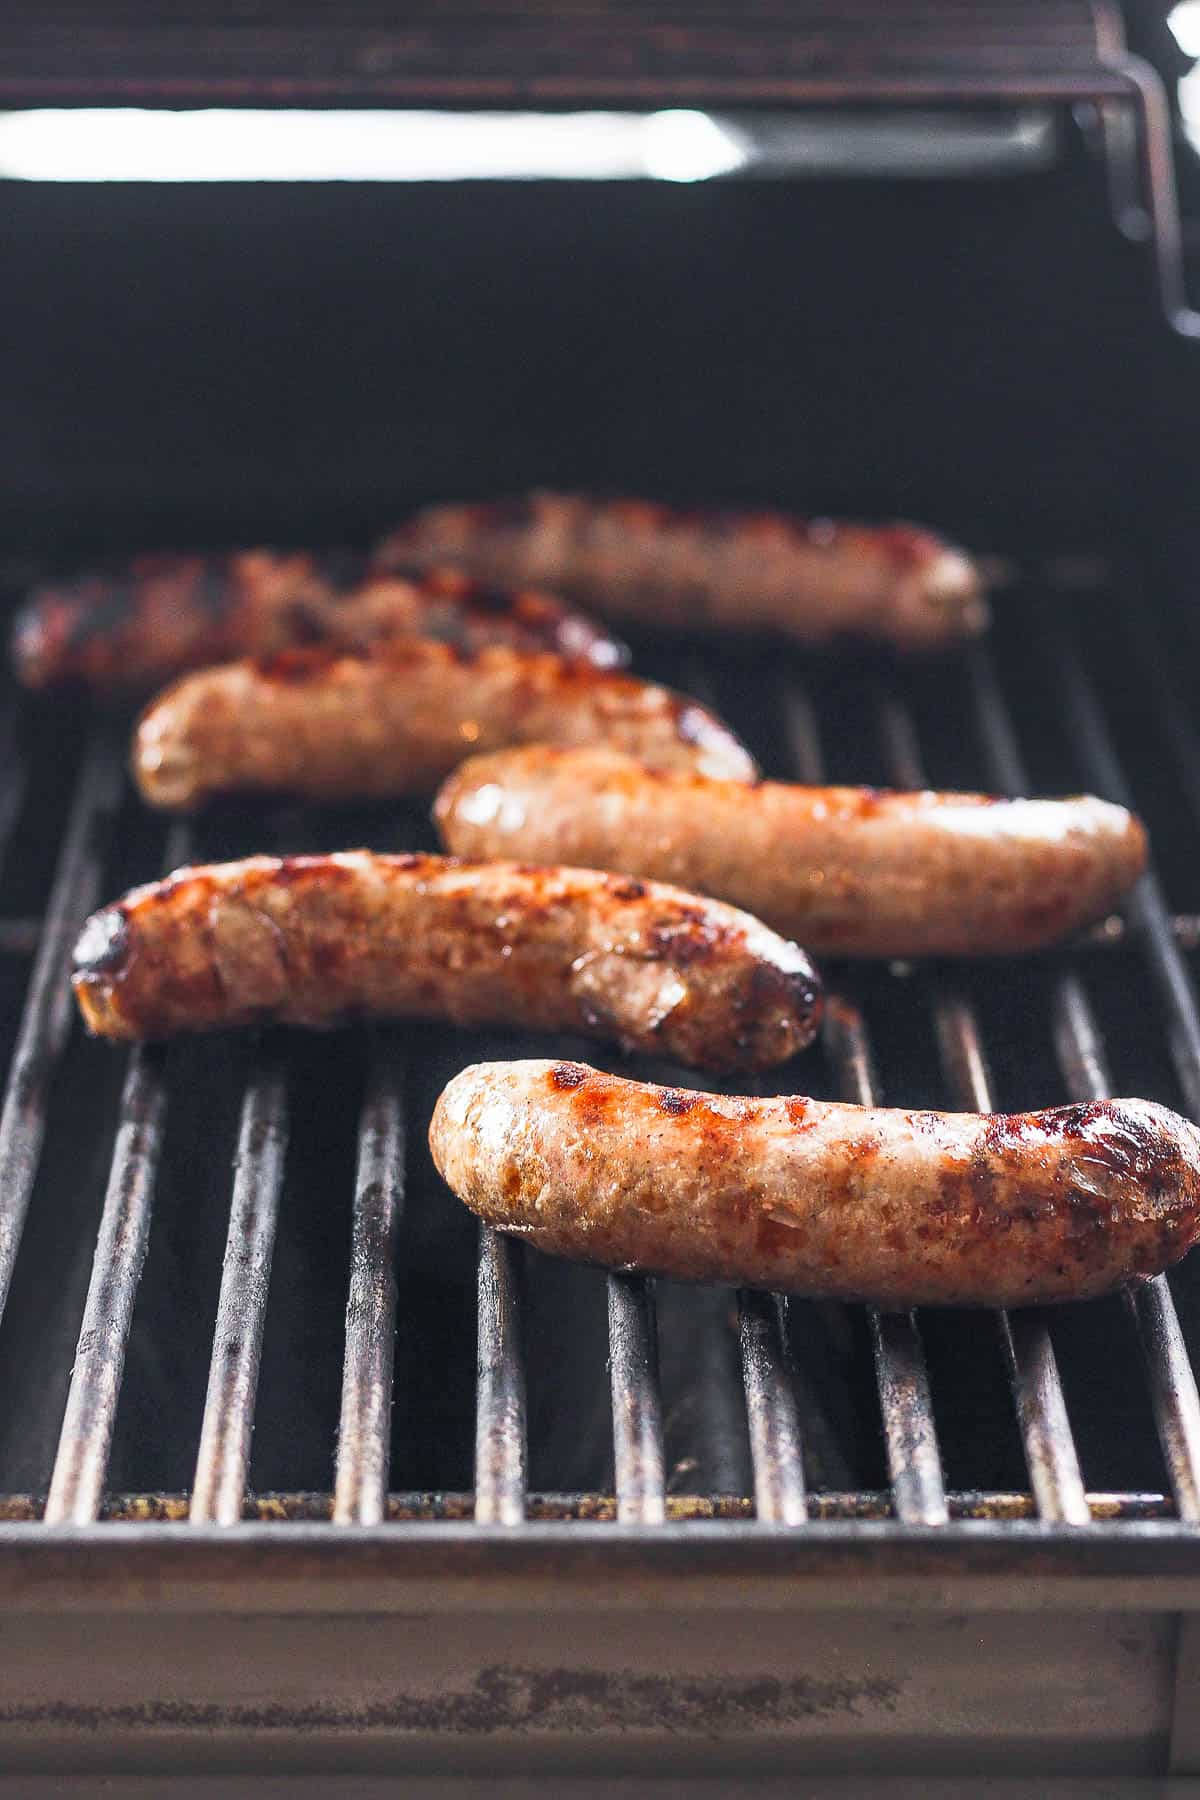 Grilled brats on the grill.